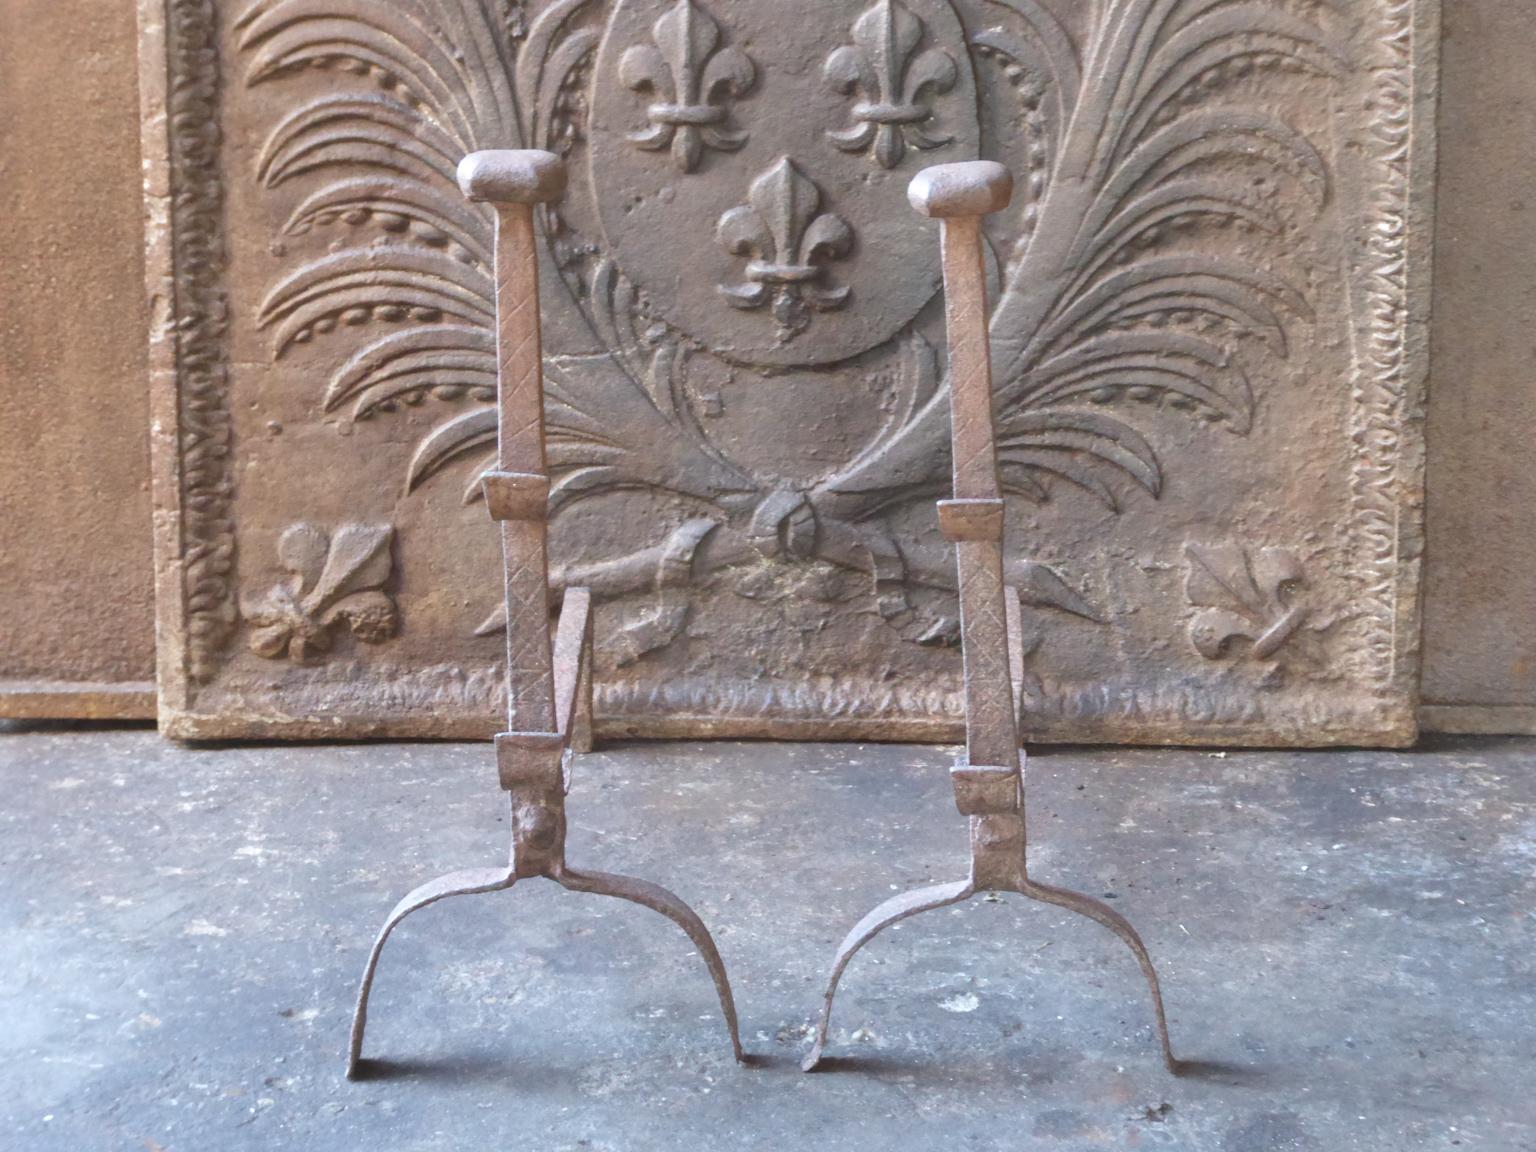 17th century French andirons made of wrought iron. The style of the andirons is Gothic. The andirons have spit hooks to grill food. They are in a good condition.